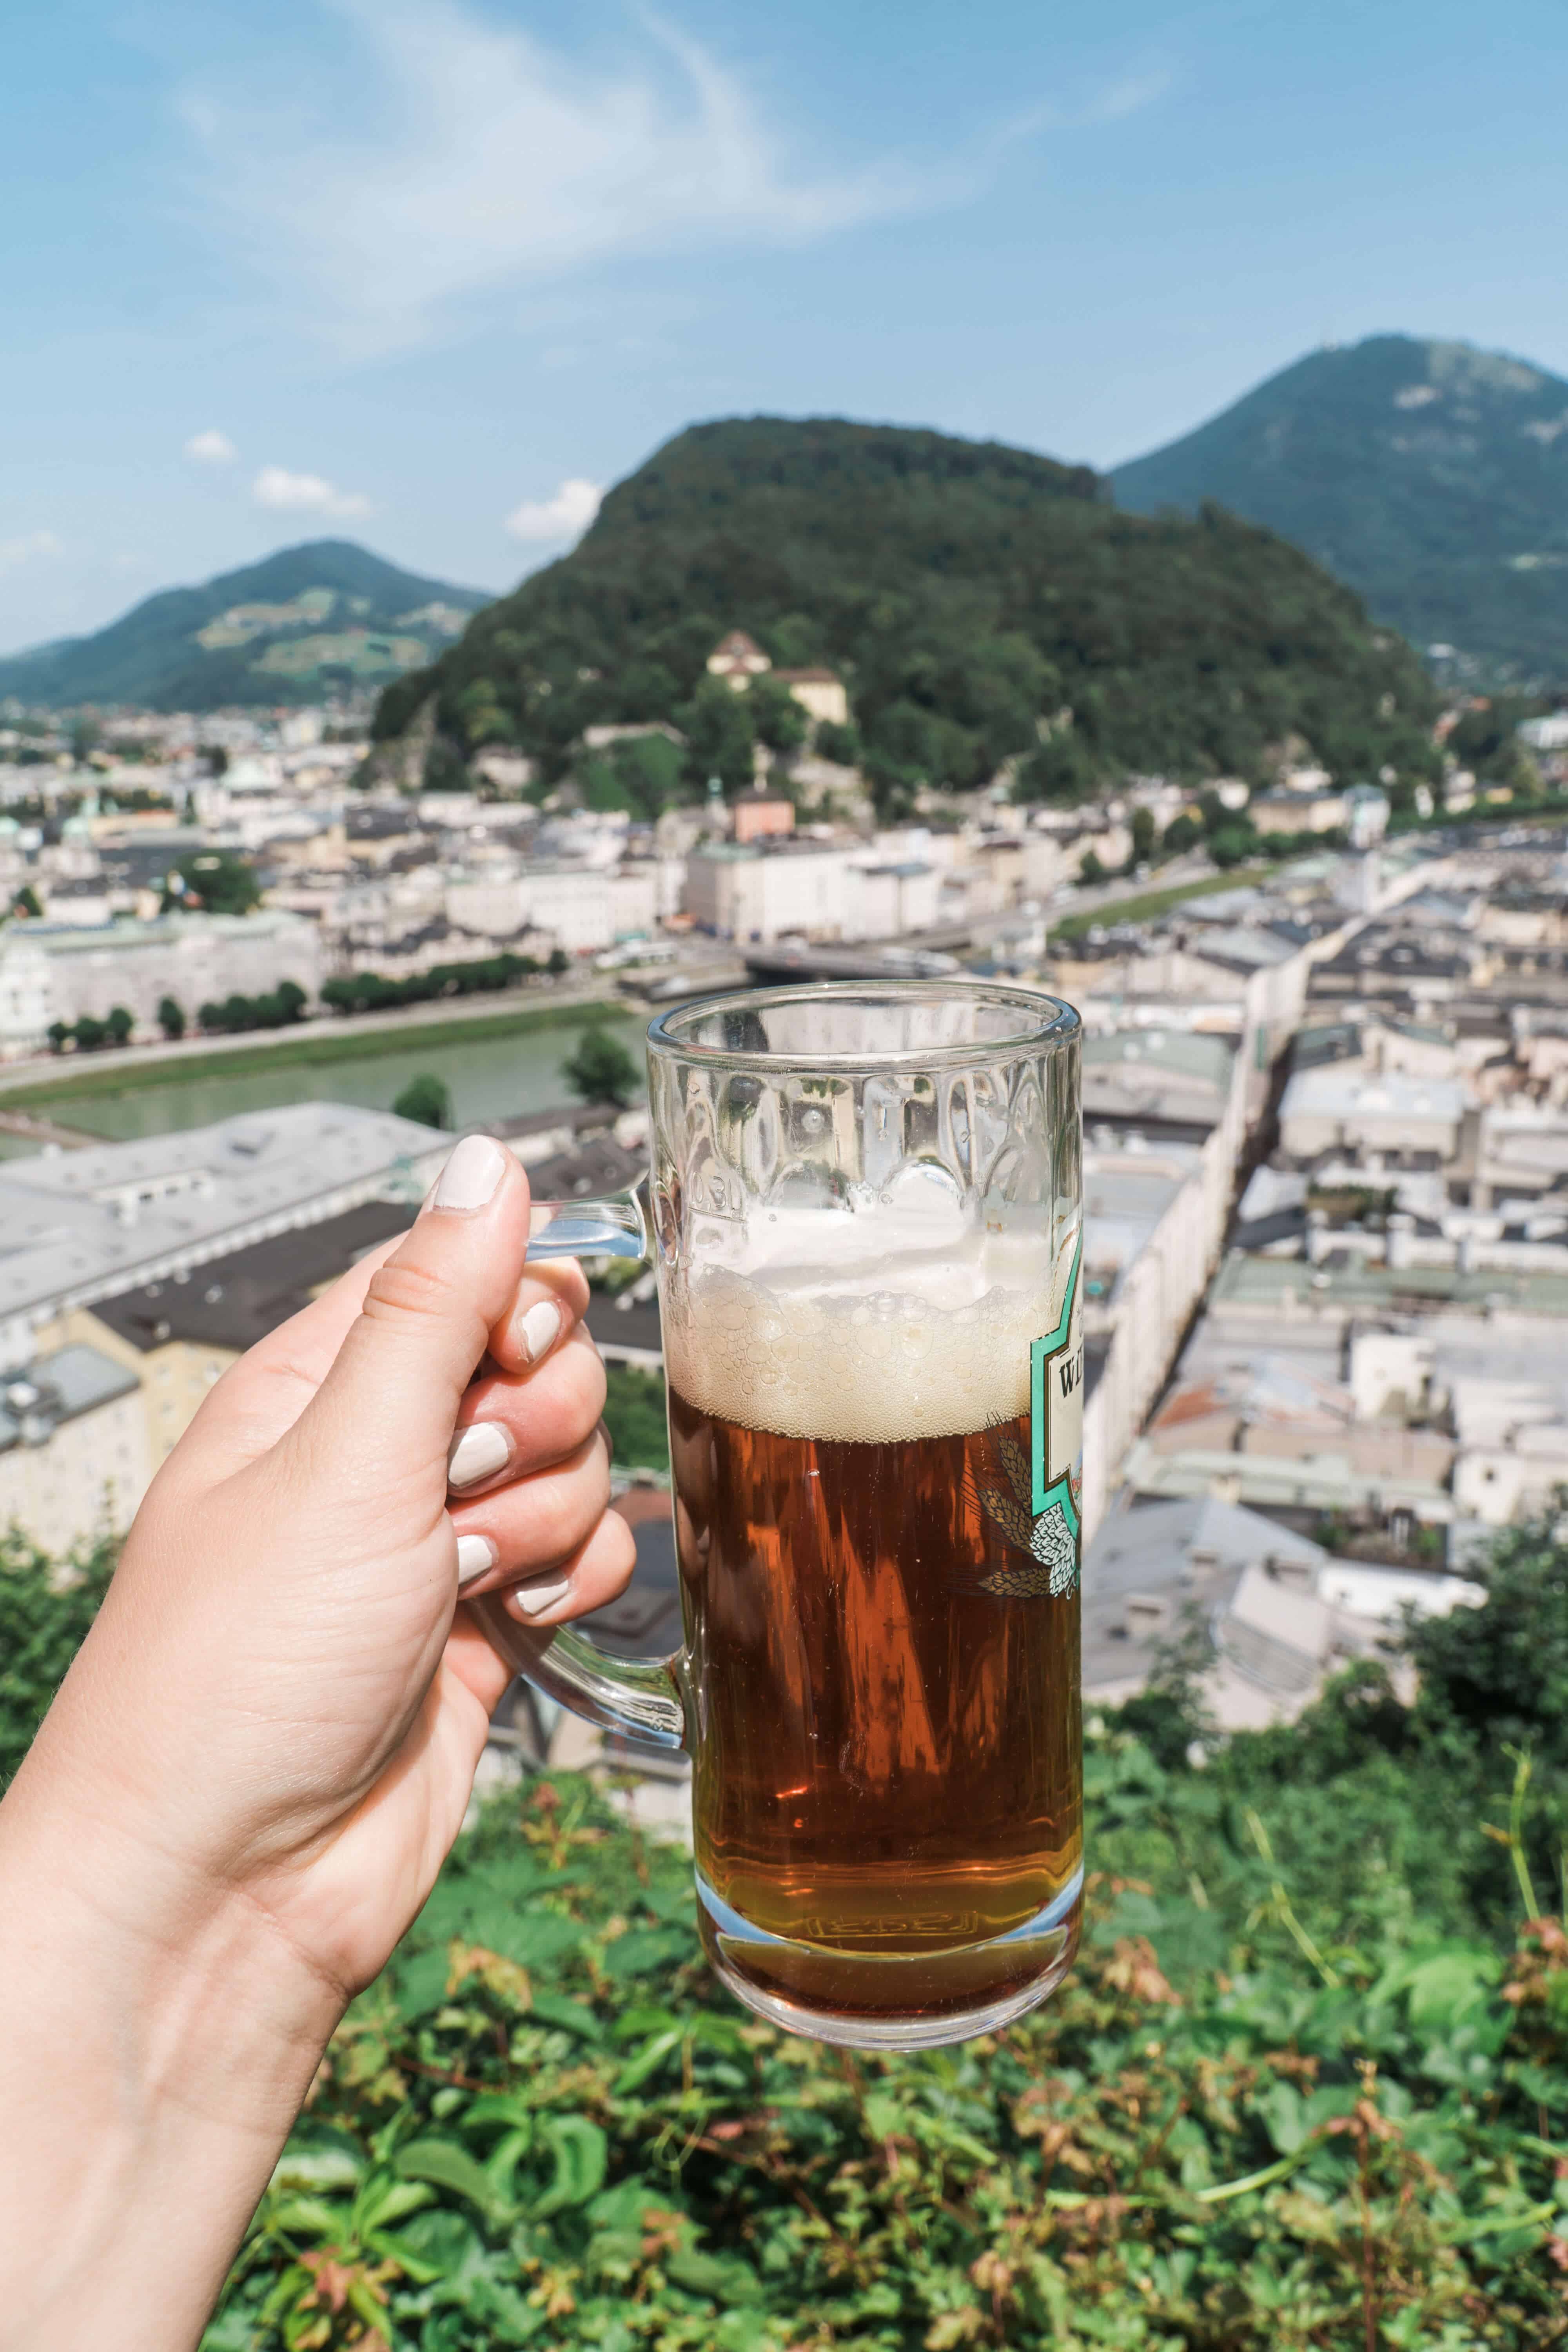 How to Spend One Day in Salzburg Austria | Beer at Gasthaus Stadtalm Cafe | The Republic of Rose